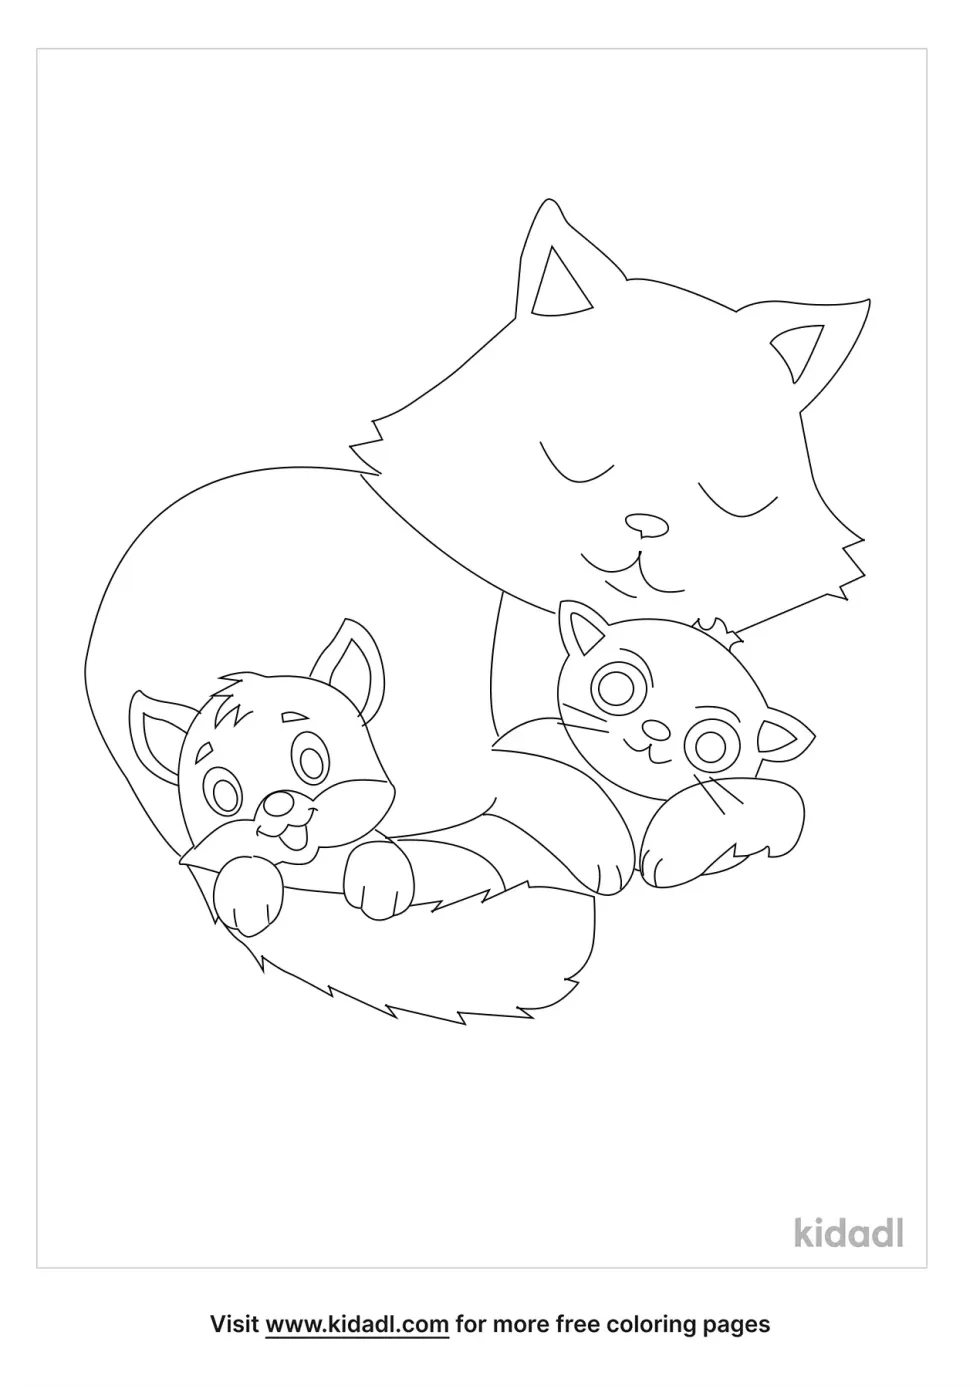 Cat And Kitten Coloring Page